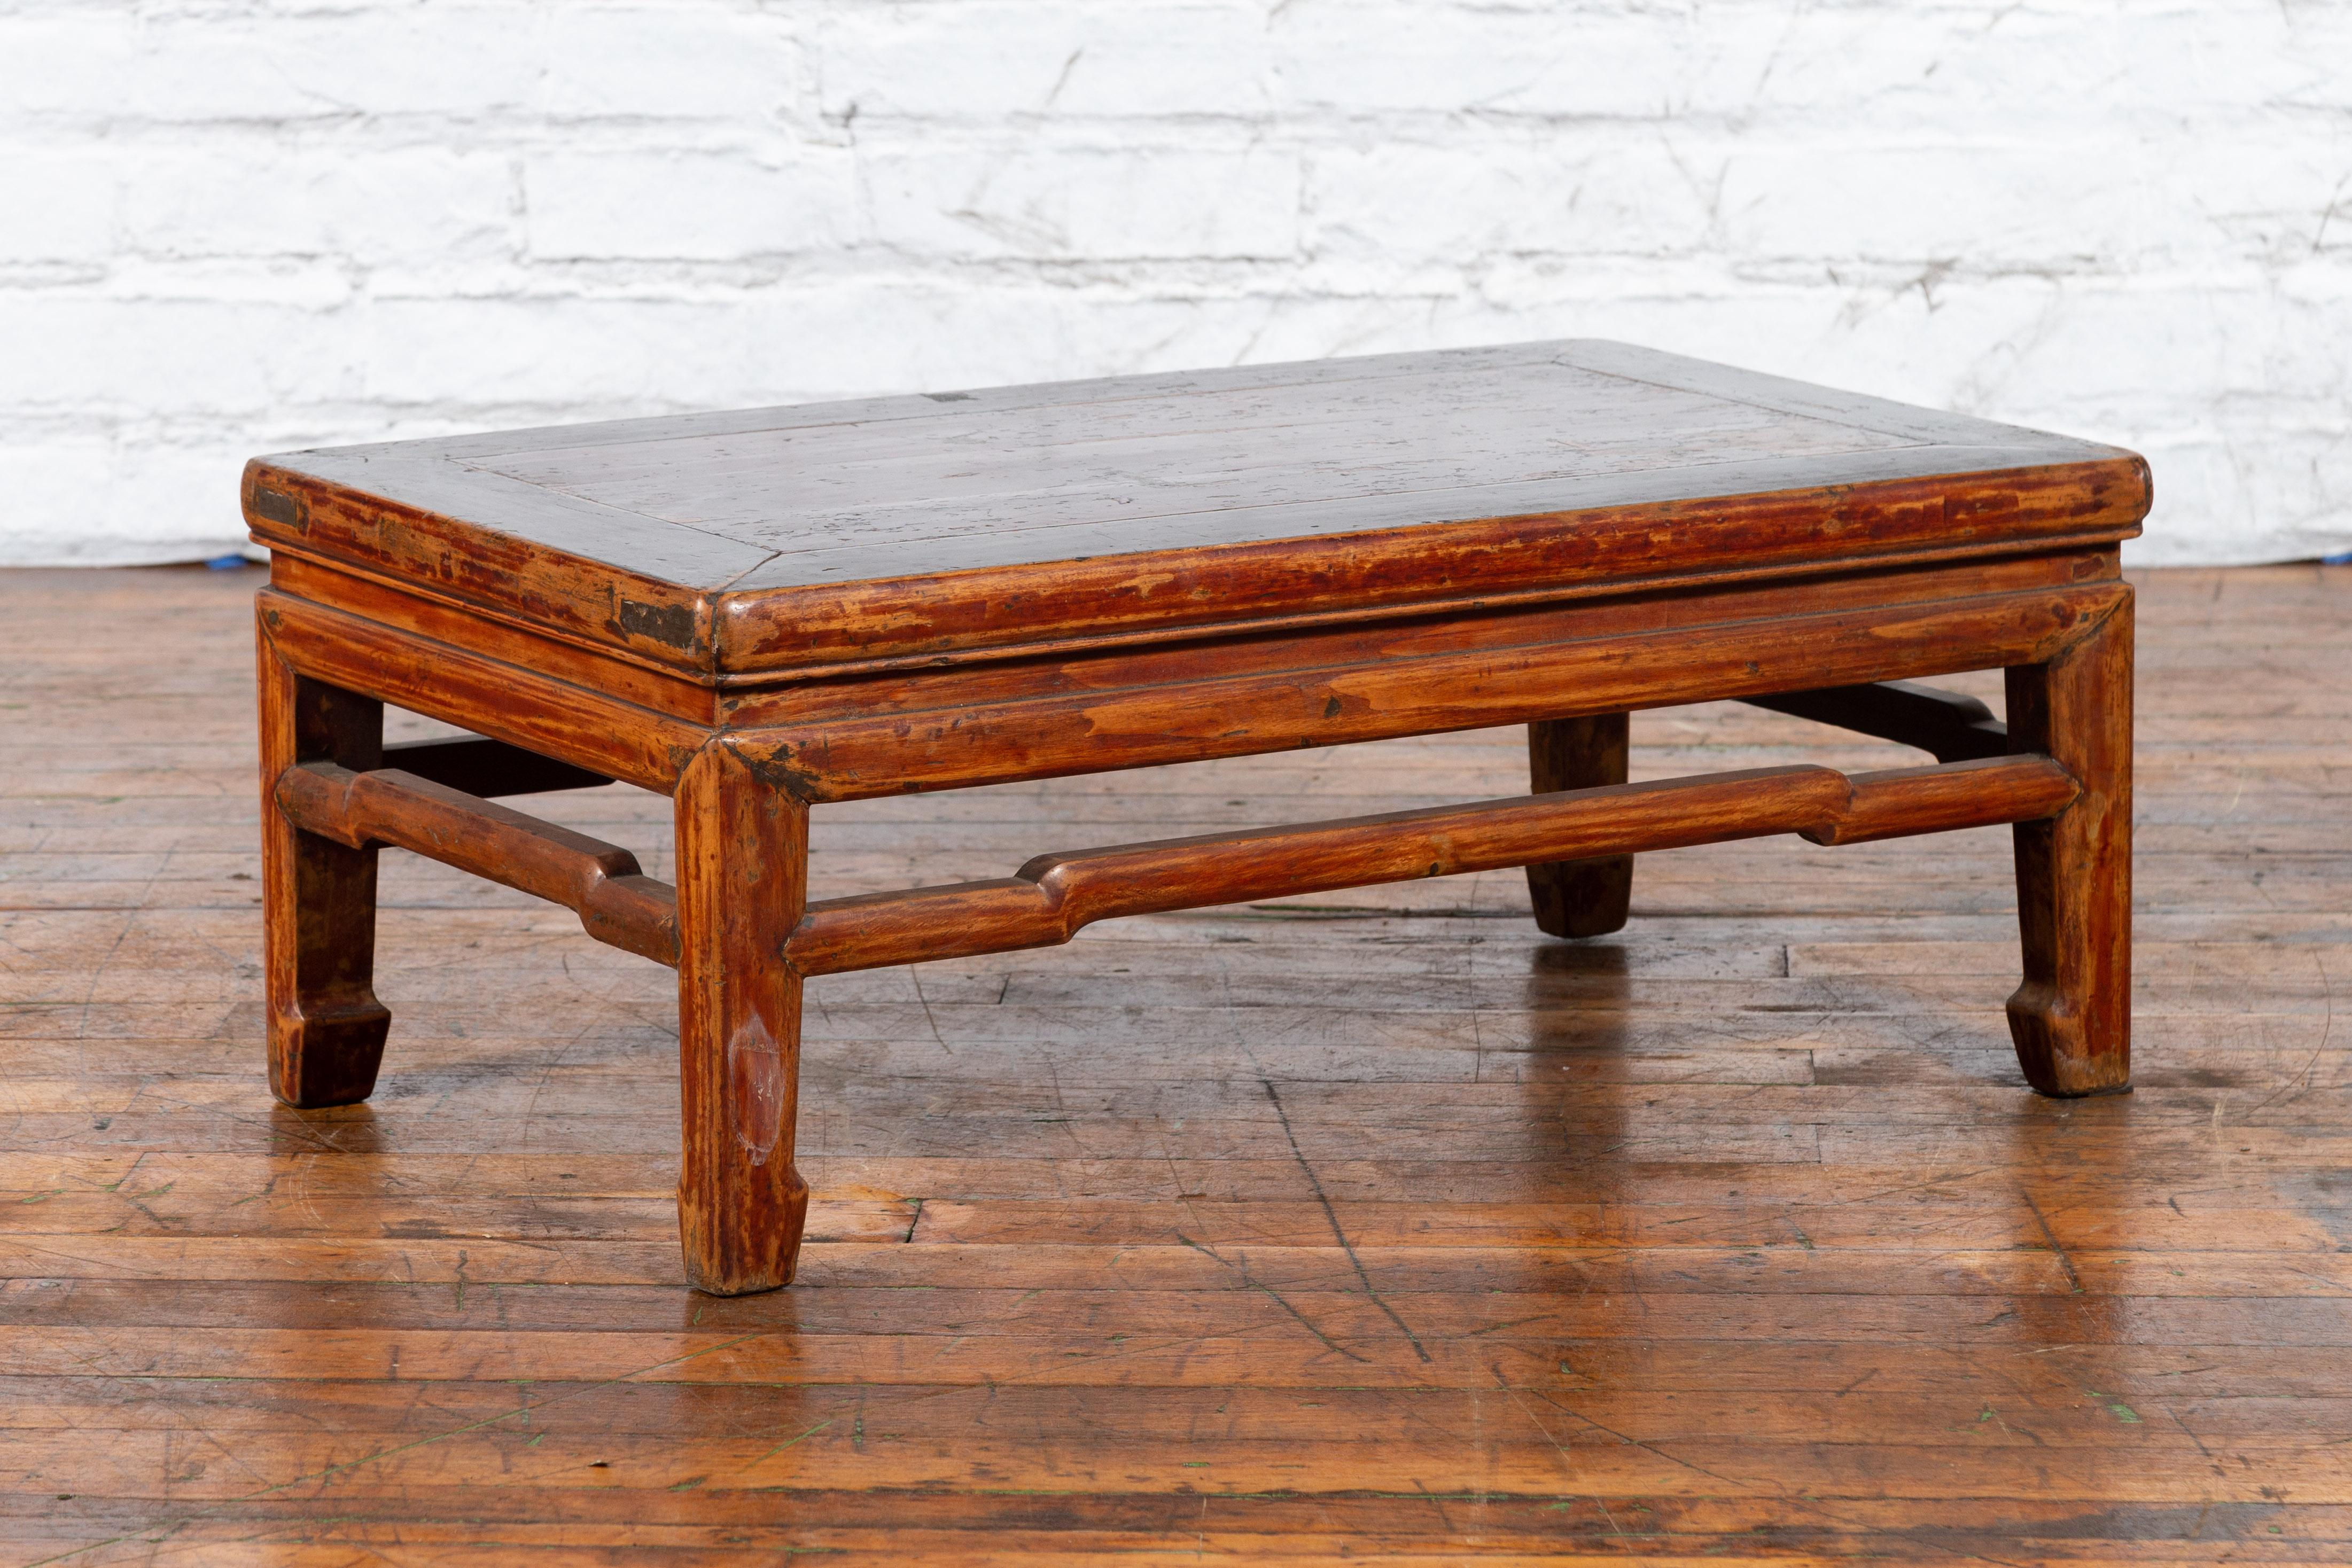 A Chinese Qing Dynasty period distressed low table from the 19th century with humpback stretchers and horse hoof feet. Created in China during the Qing Dynasty period, this low table features a rectangular top with central board, sitting above a